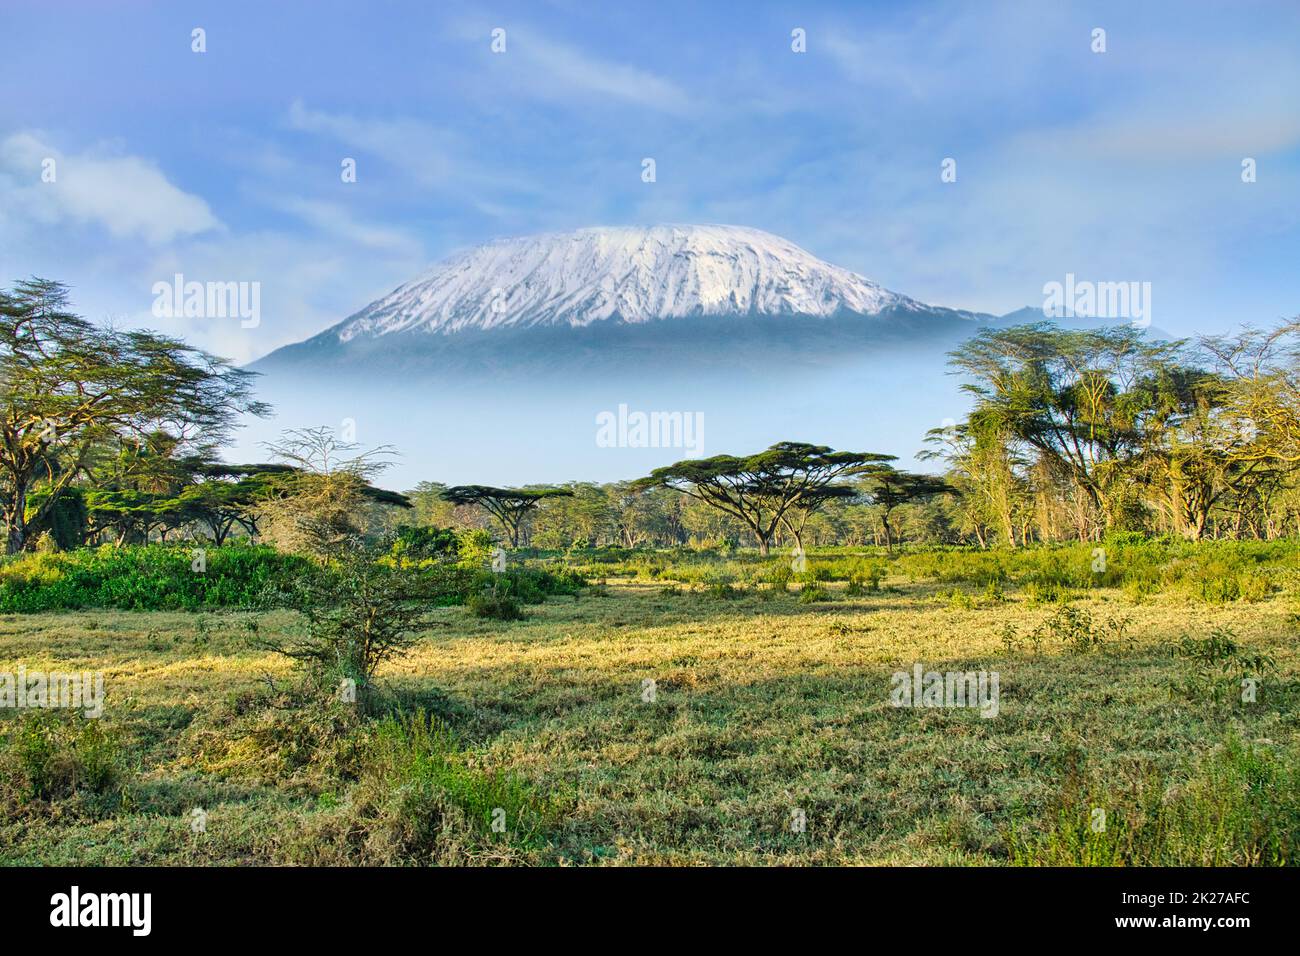 Pictures from the snow-capped Kilimanjaro in Kenya Stock Photo